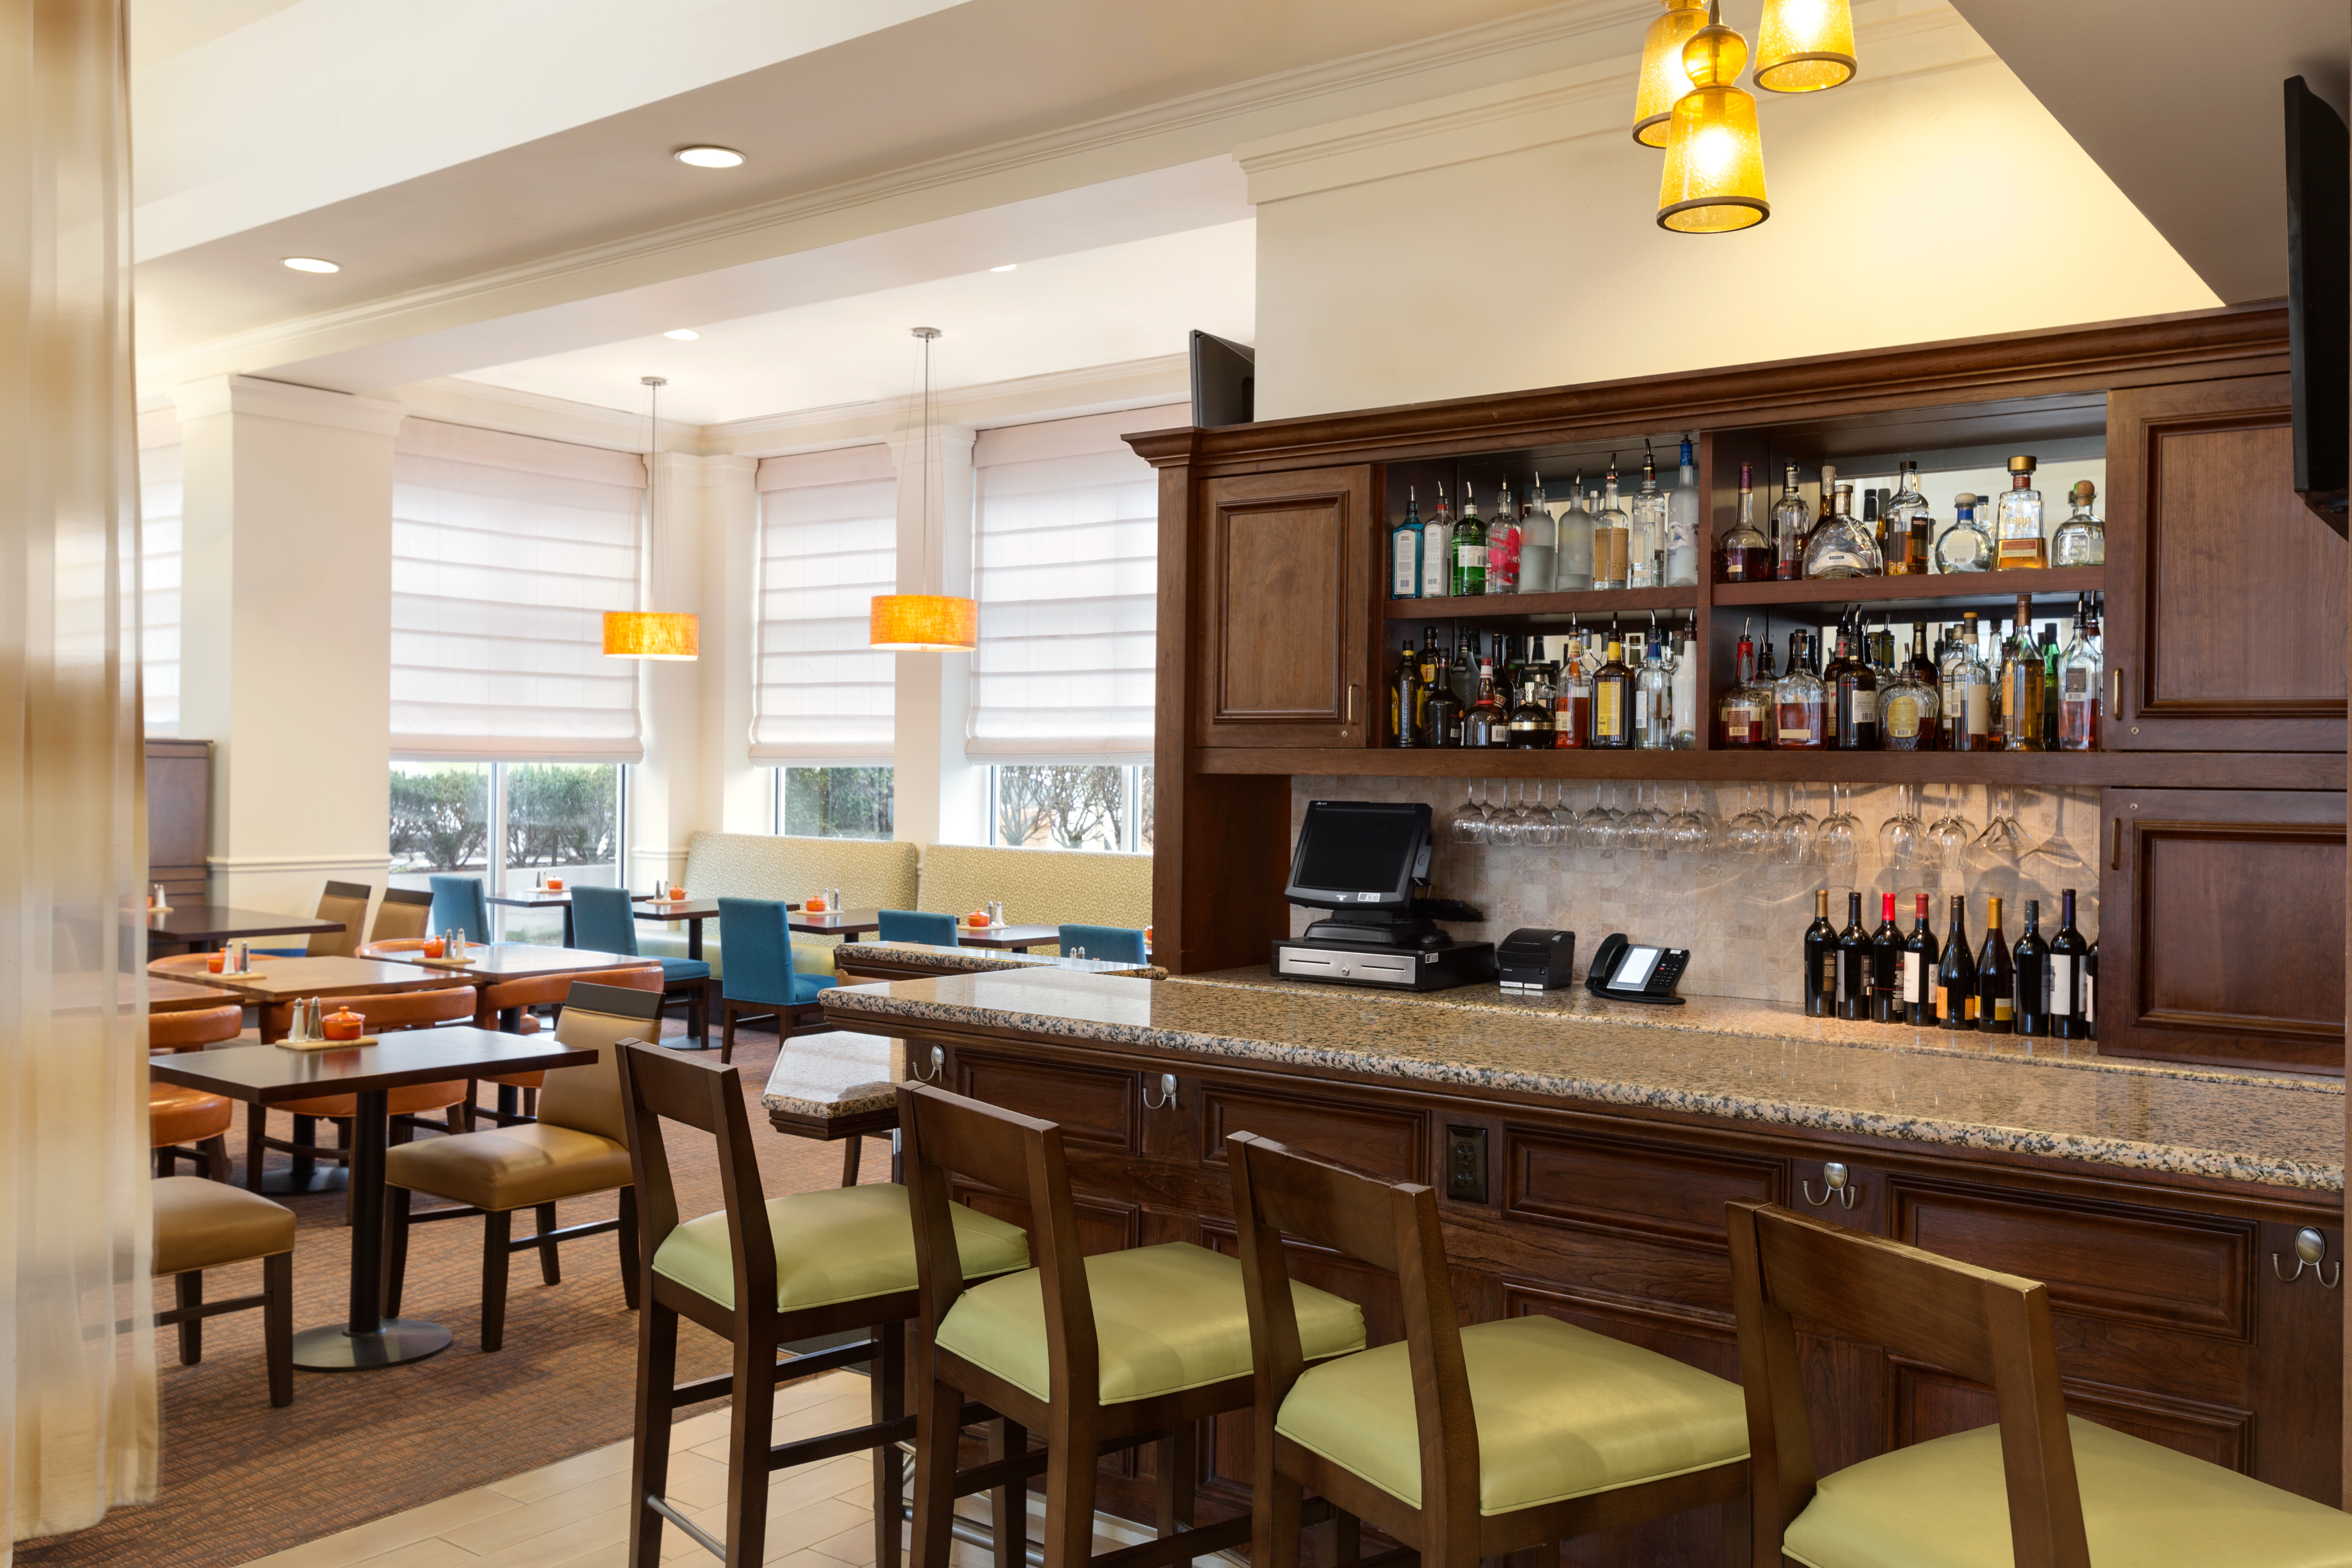 Fully Stocked Bar With Angled Green Bar Chairs and Table Seating by Windows in Background